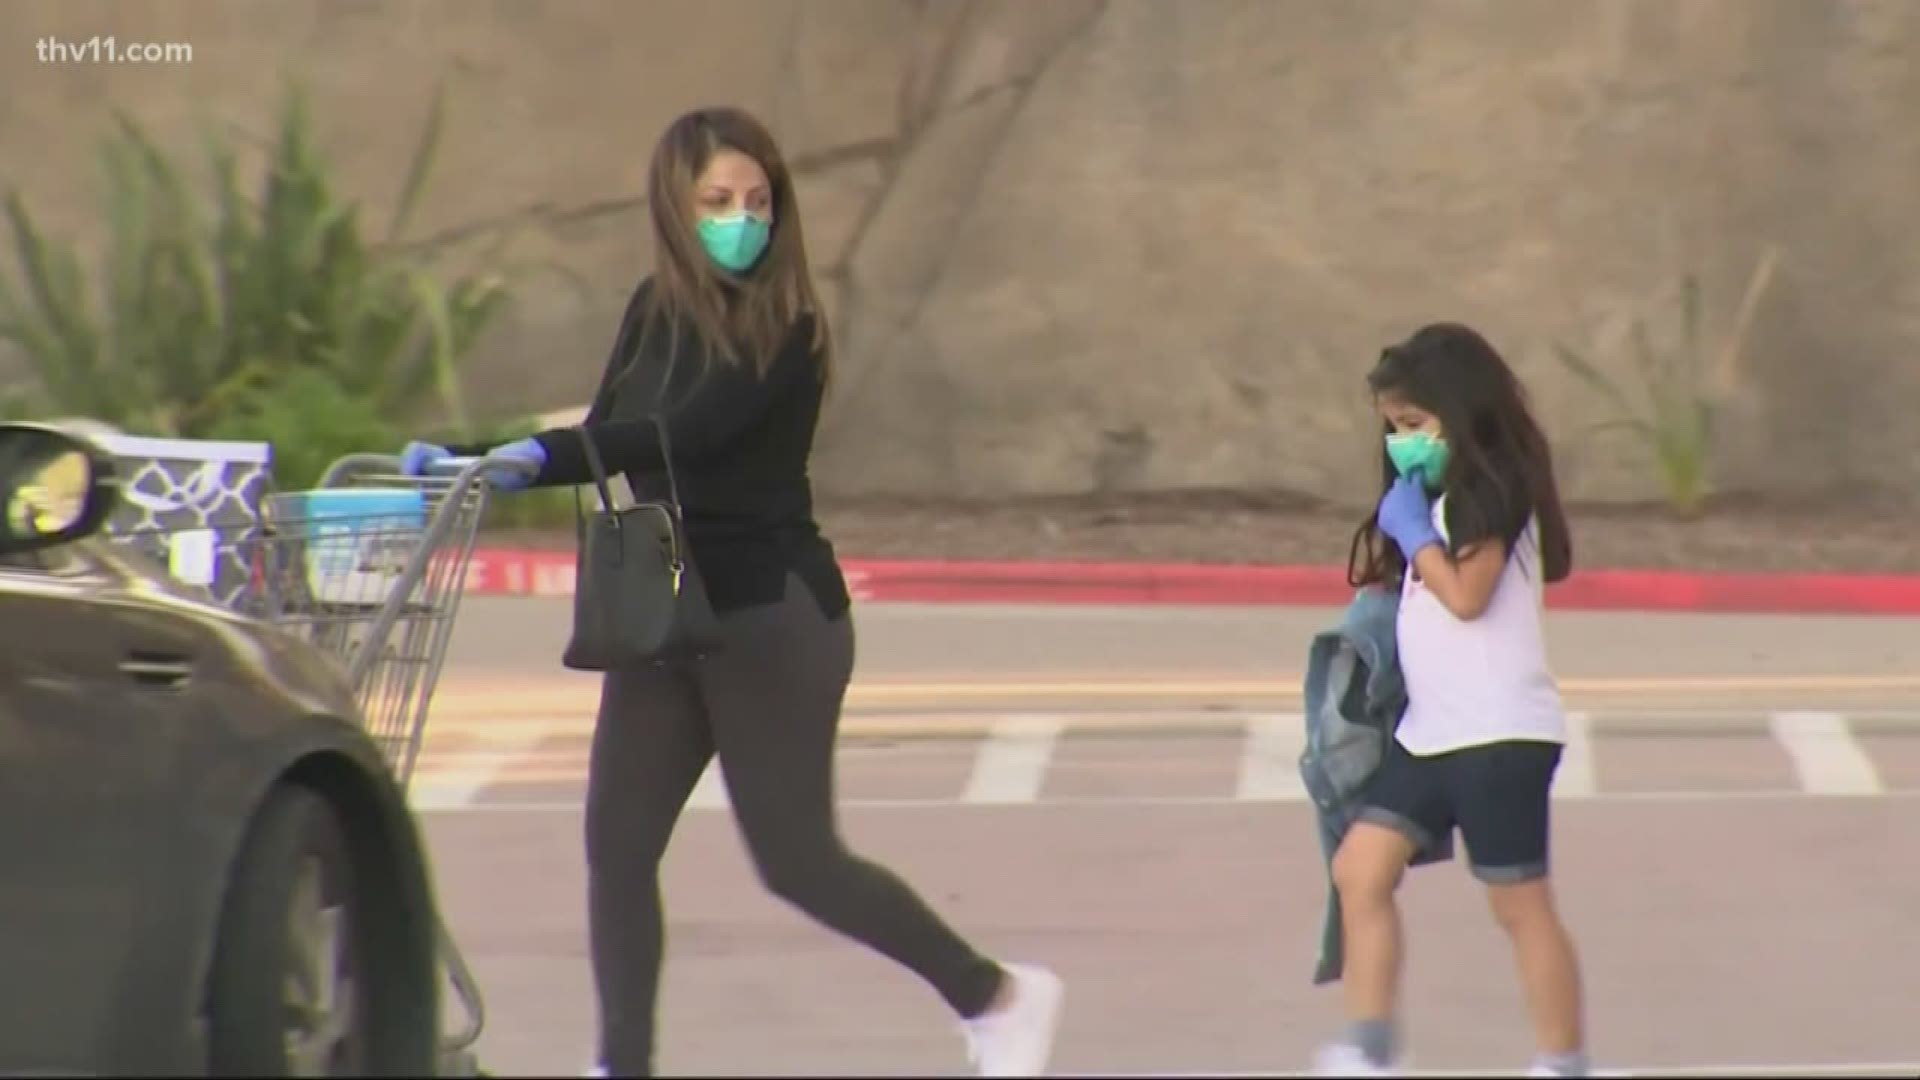 The CDC has recommended wearing masks any time you go out.